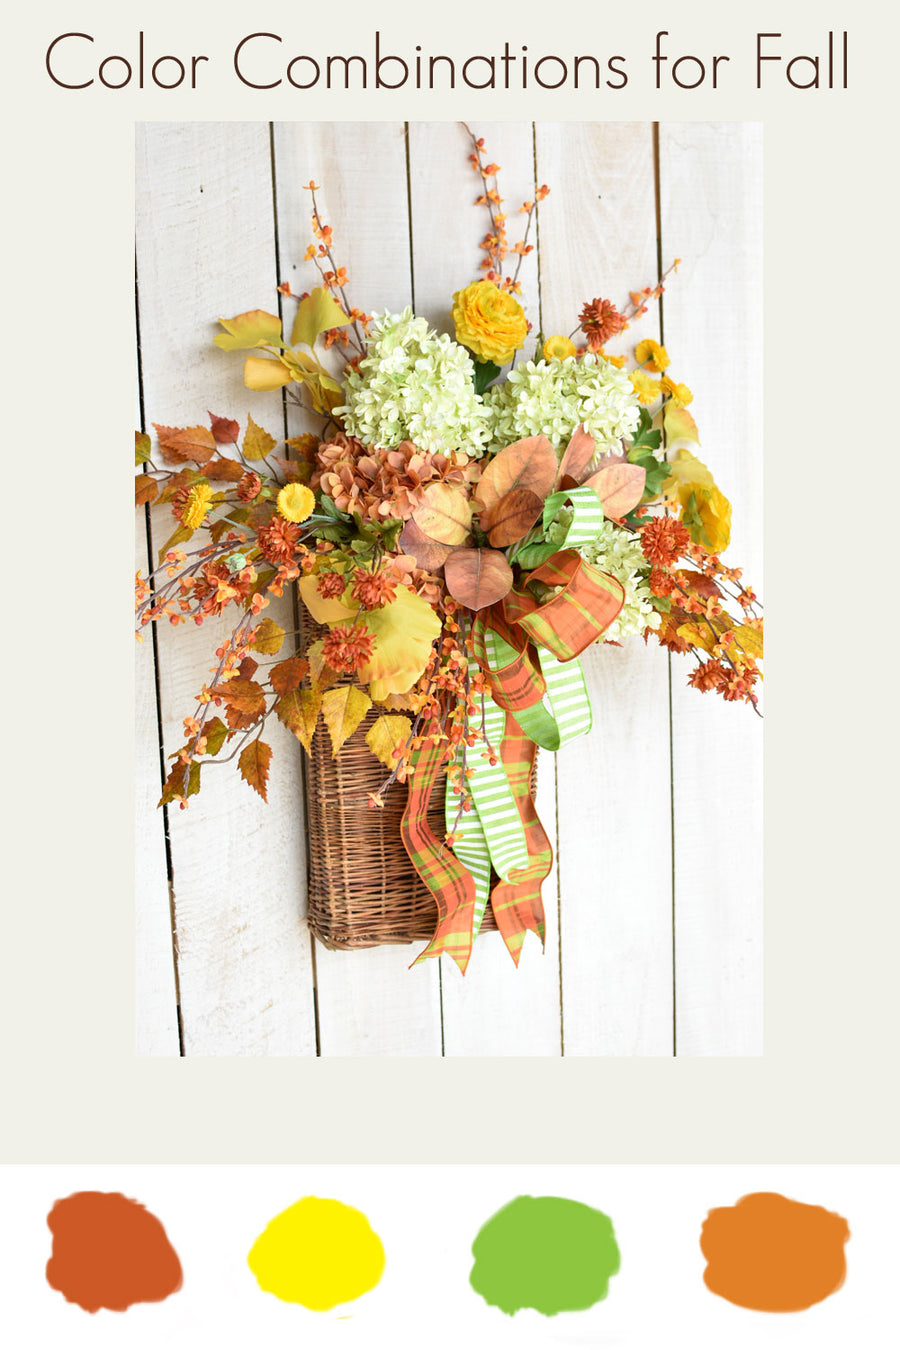 Fall Decorating Inspiration : "Happy Fall" Color Combination